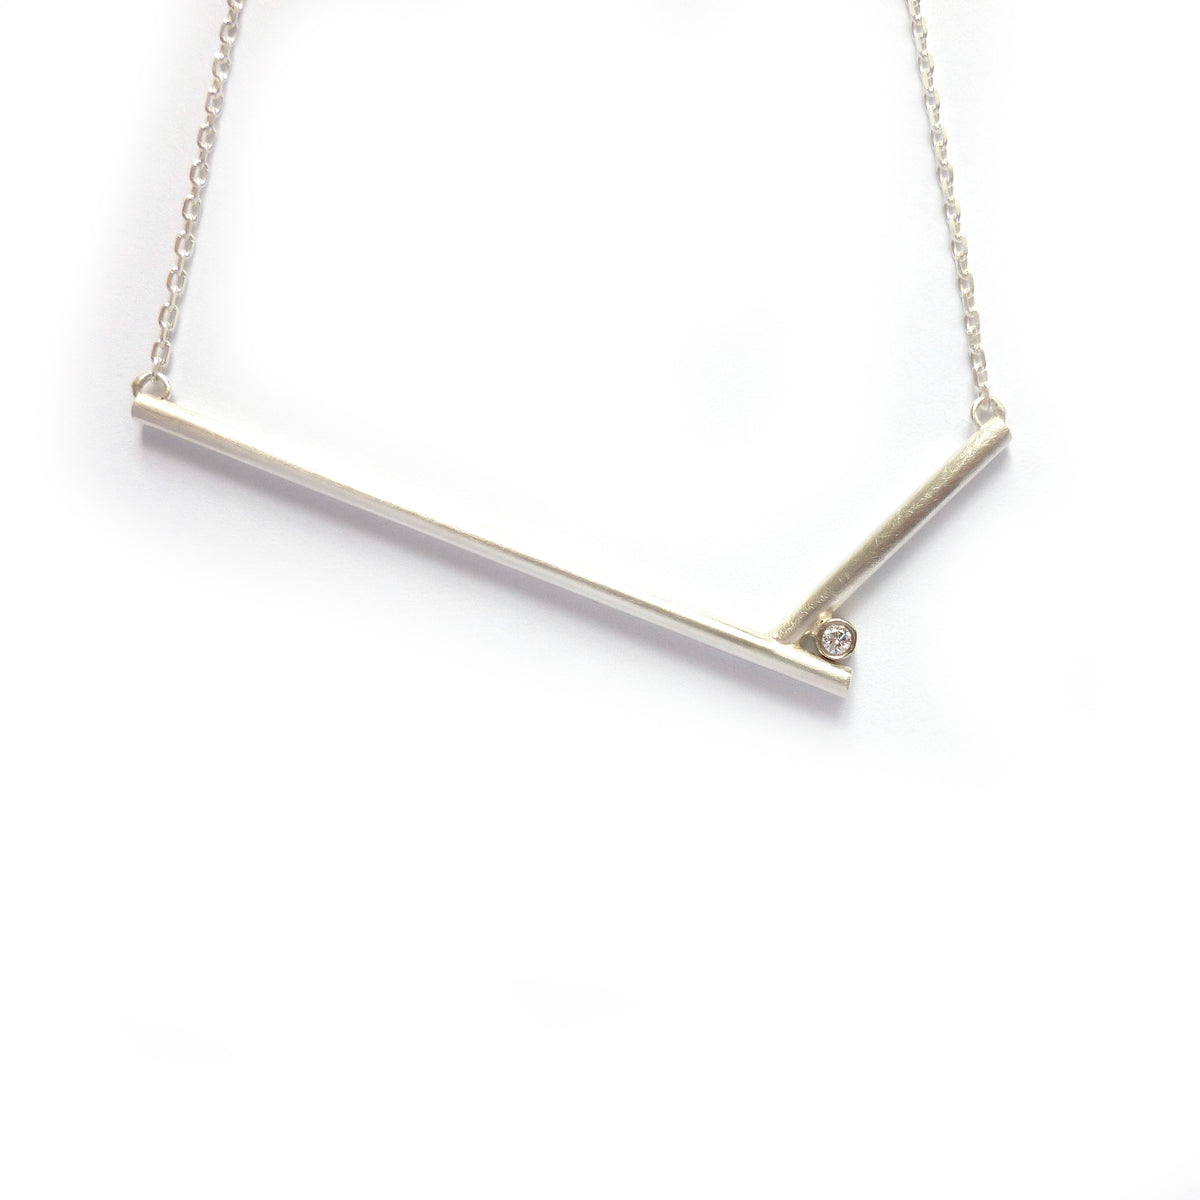 modern contemporary silver and diamond necklace handmade designer and maker by Sue Lane 